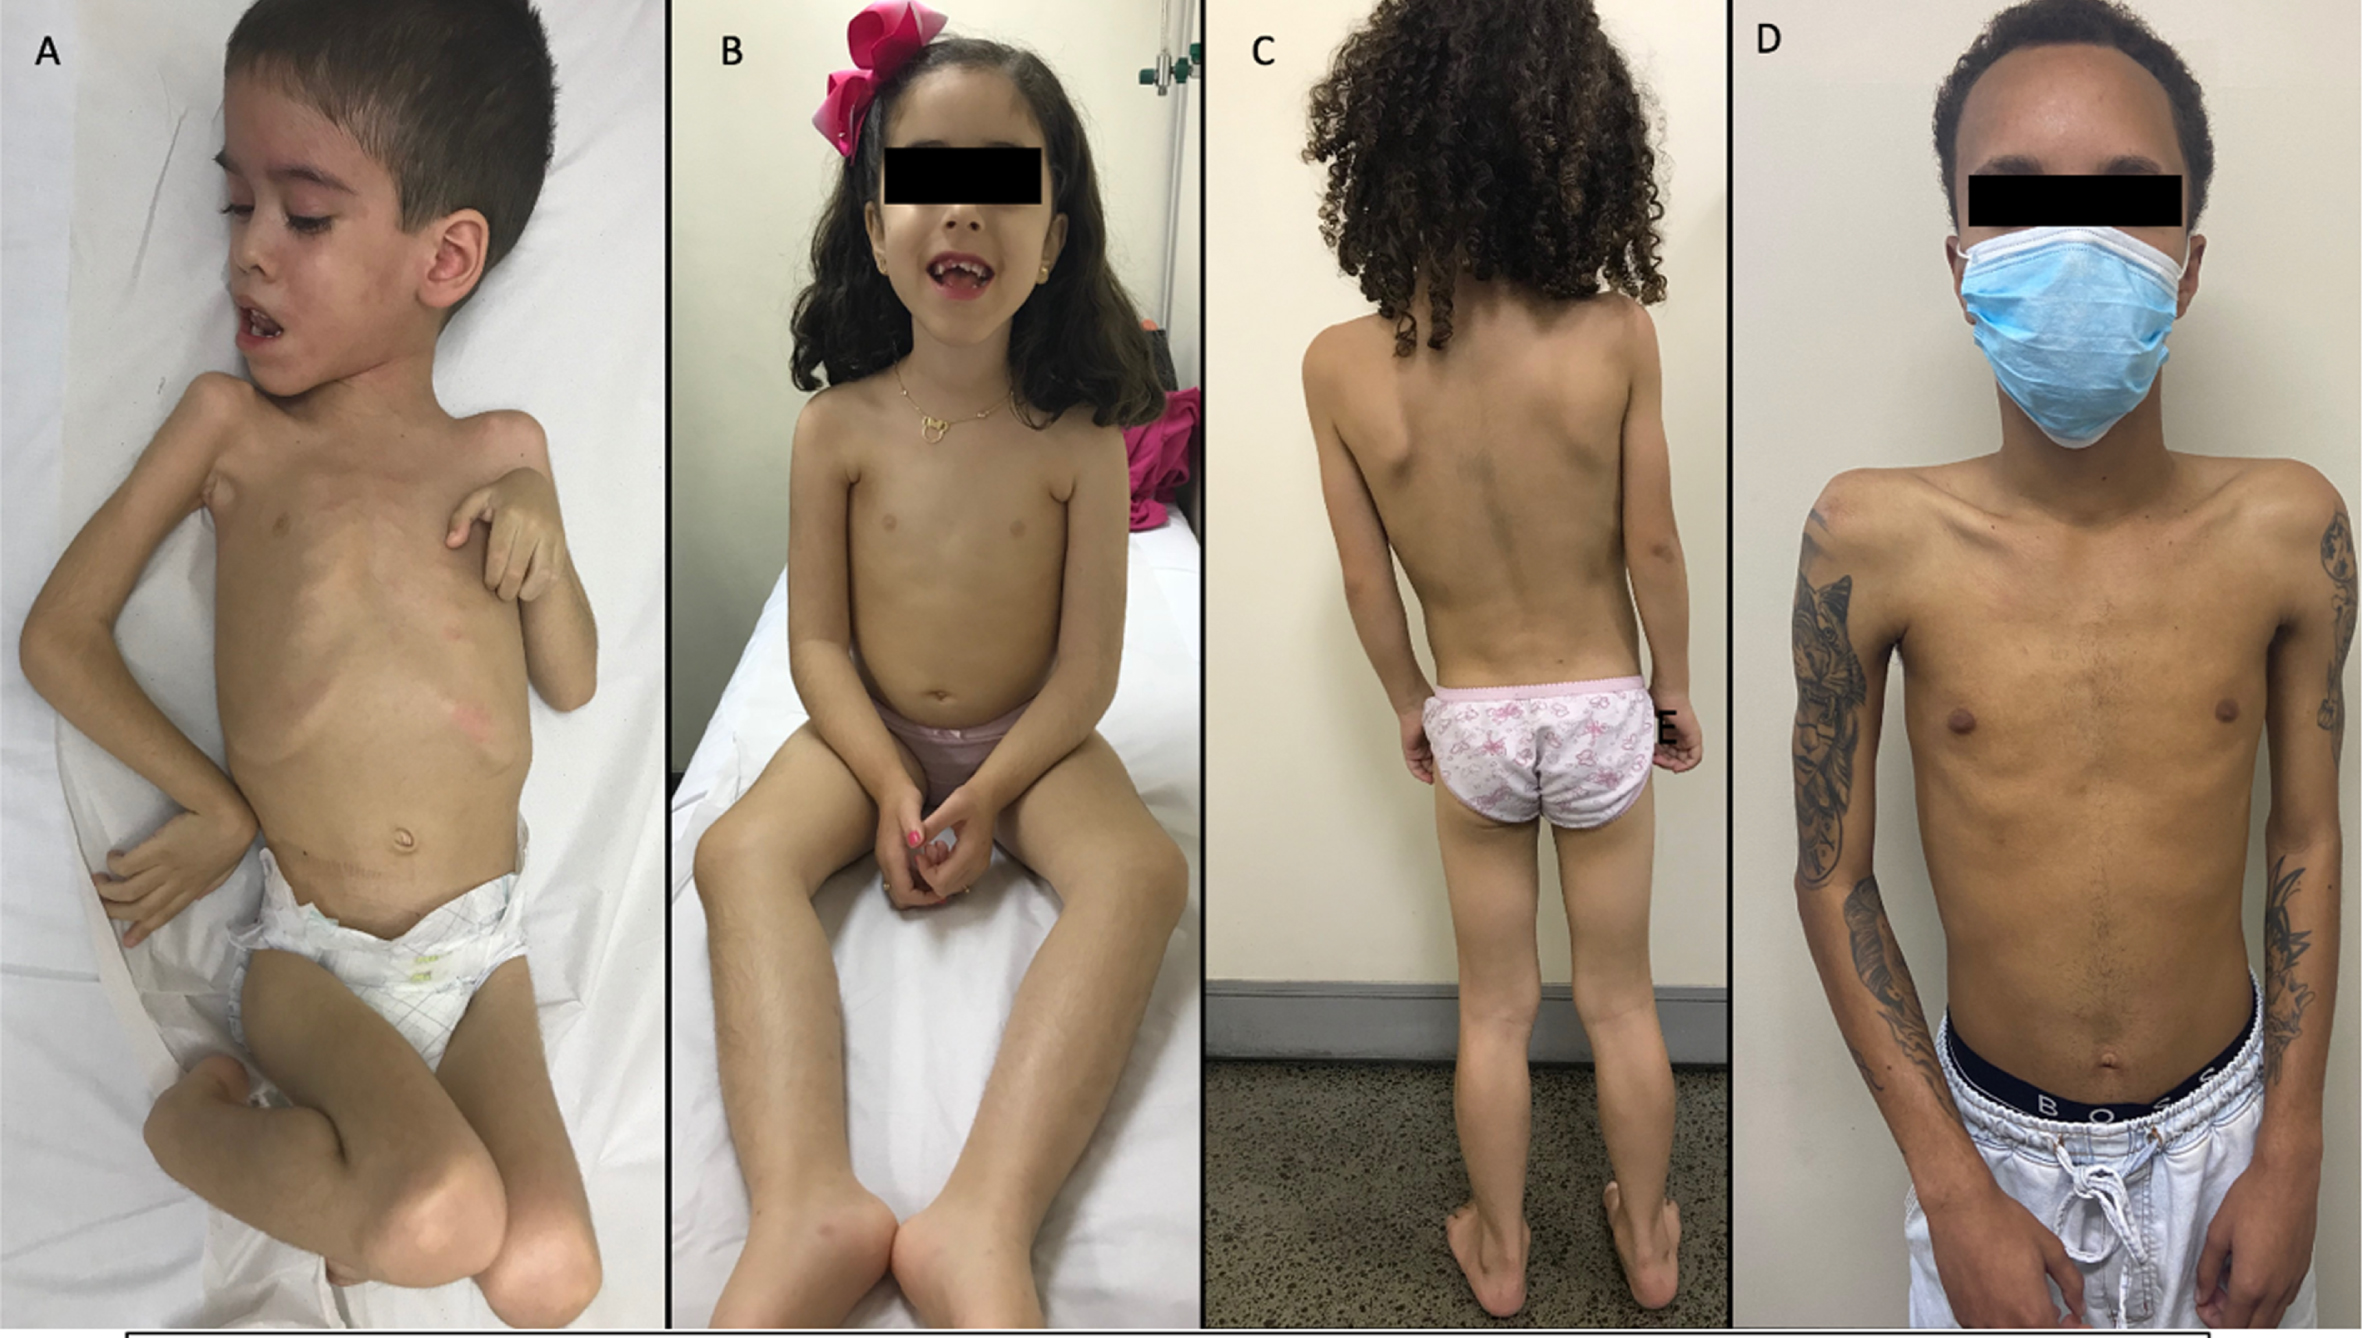 LAMA2-RD phenotypes. (A) Patient never able to sit, (B) Patient able to sit, but unable to walk, (C) Patient able to walk, with delayed motor development, and (D) Patient able to walk with LGMD phenotype.